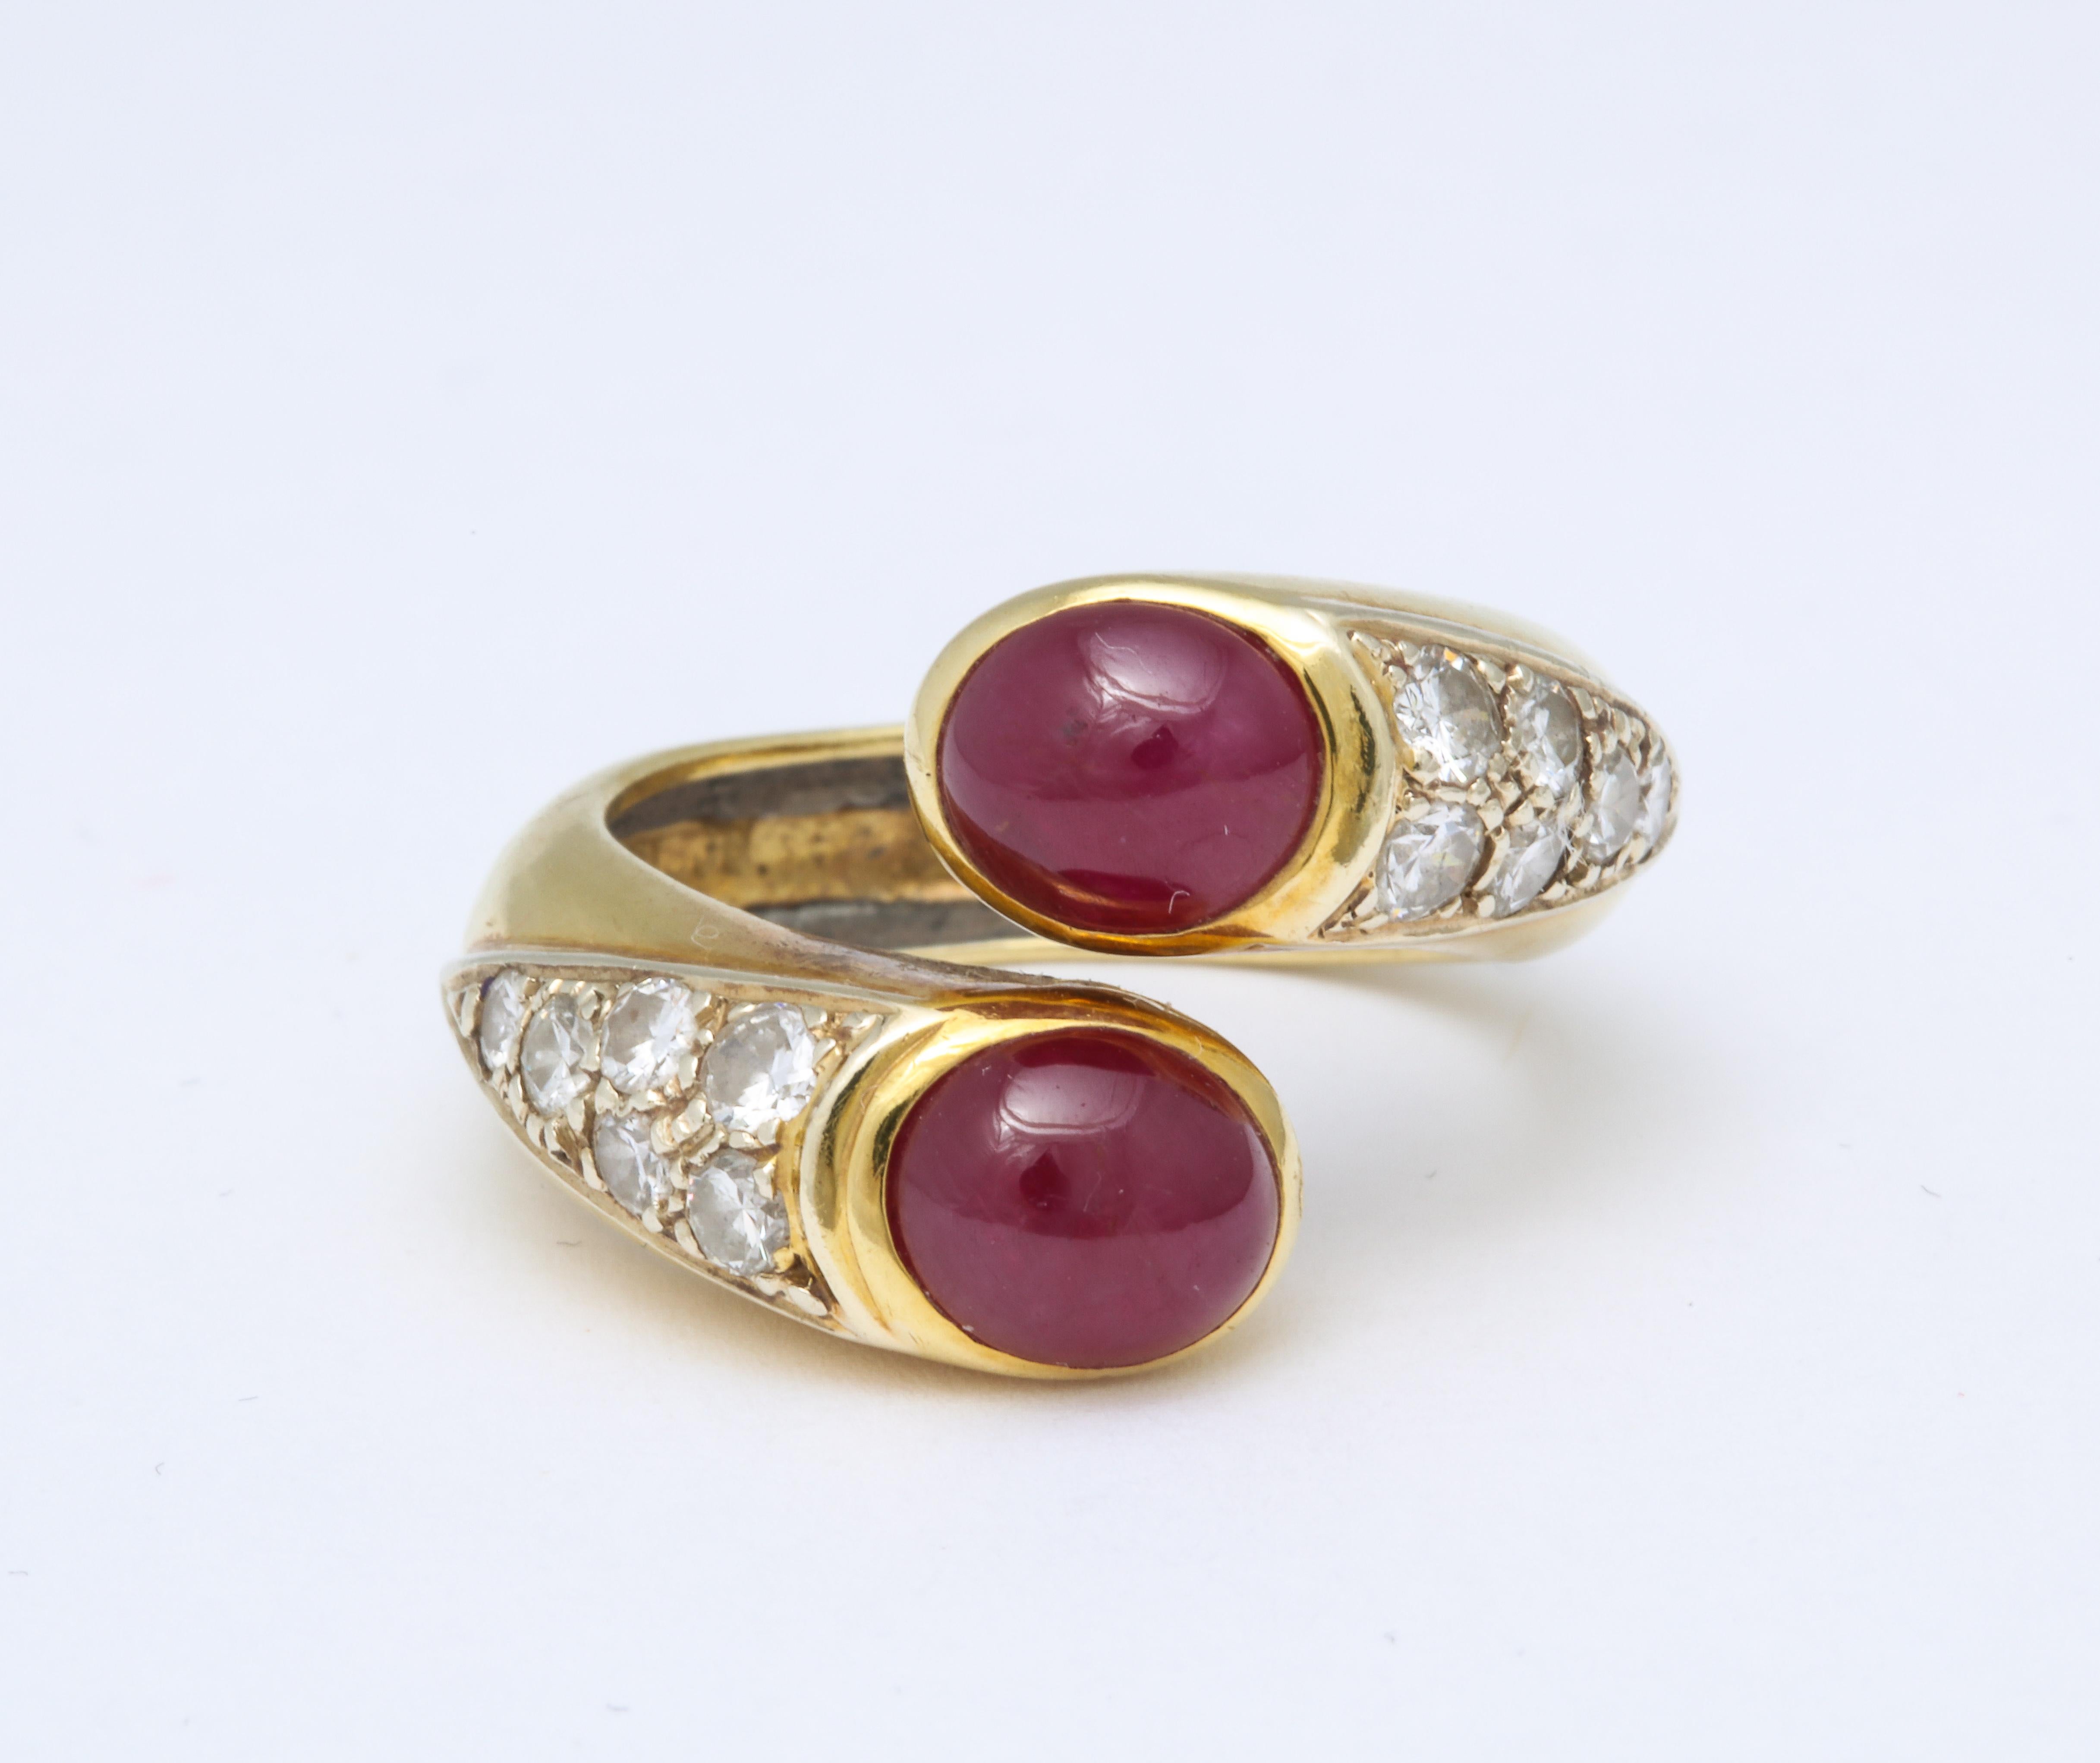 A fabulous Boris Lebeau Ruby and Diamond Gold Ring. A pair of untreated cabochon rubies meet with a tail of mine diamonds set on an 18 kt gold ring. Size 5 but can be adjusted to fit.  Signed 